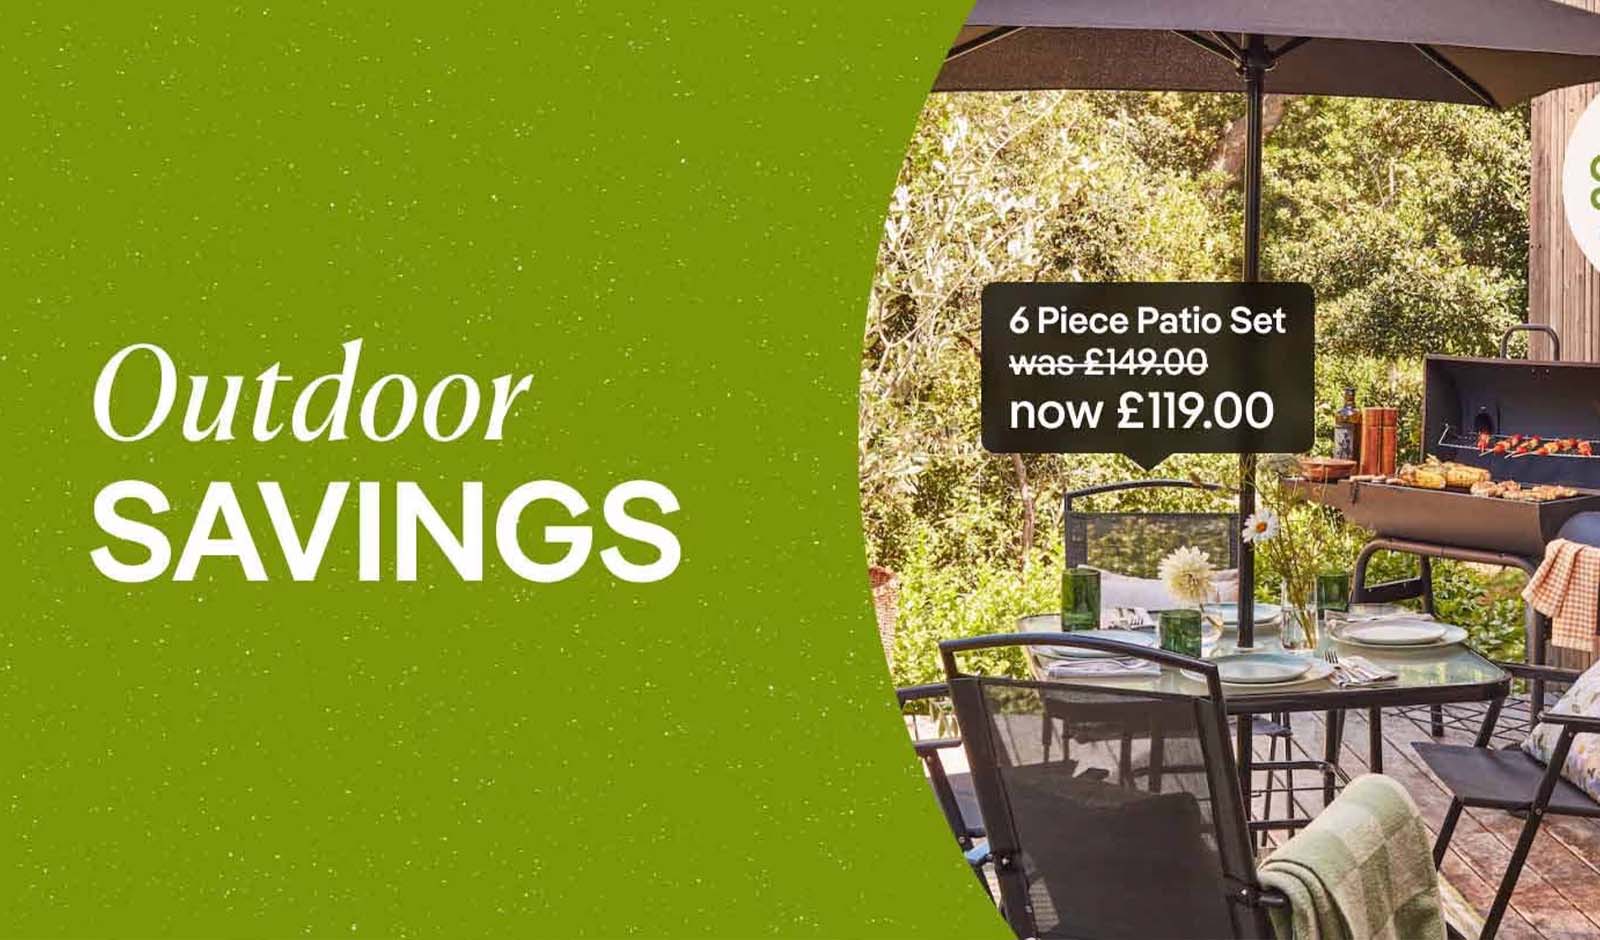 Up to 30% off Garden Furniture, BBQs, Pools and More!